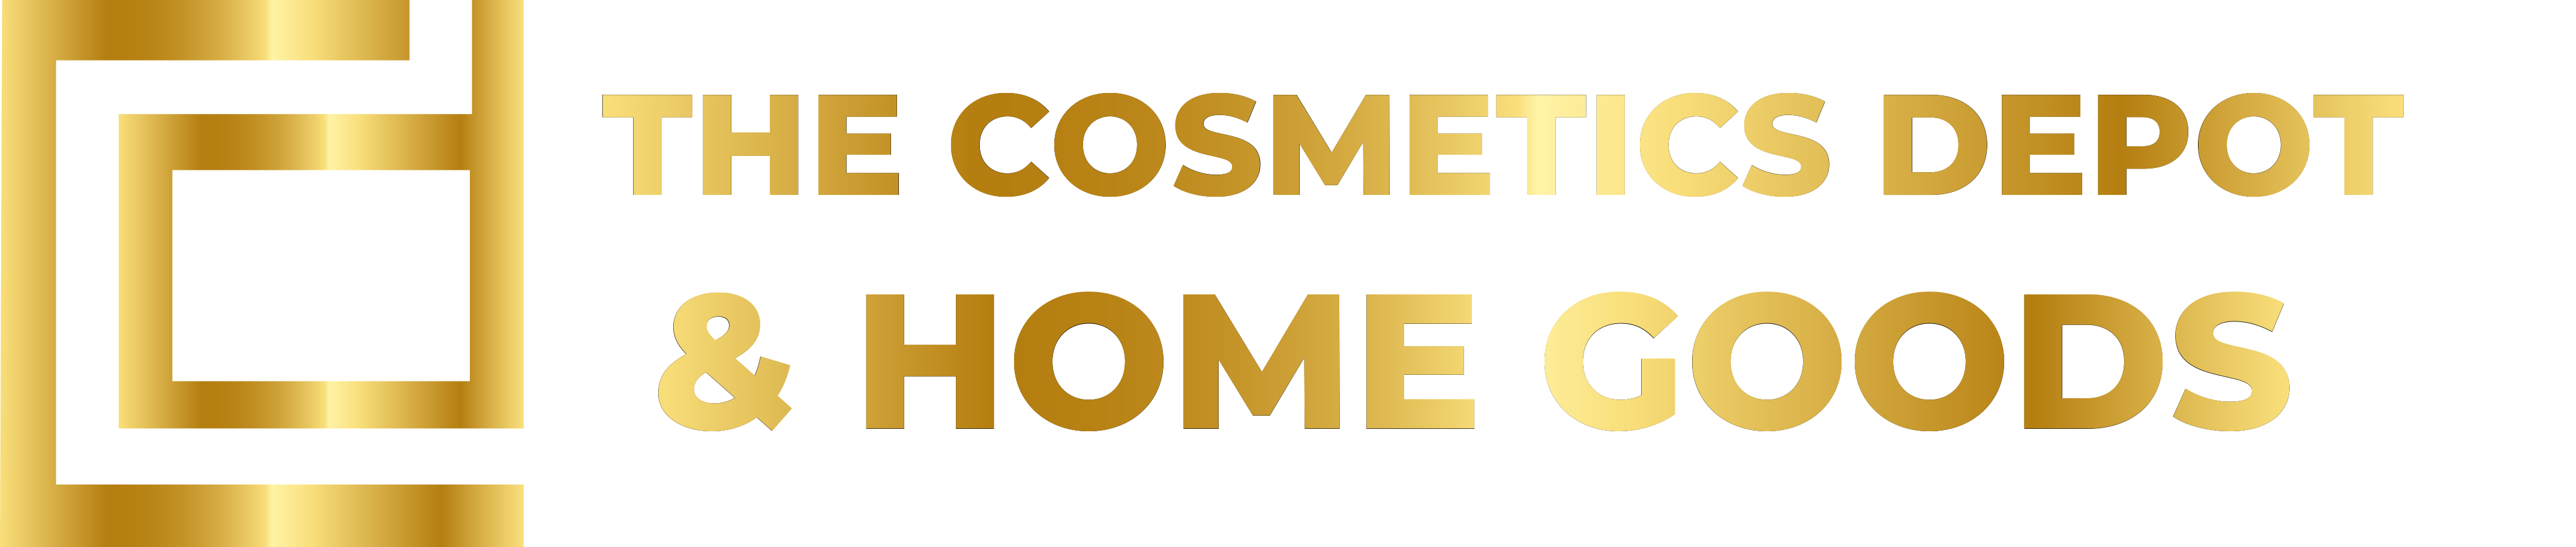 The CosmeticDepot